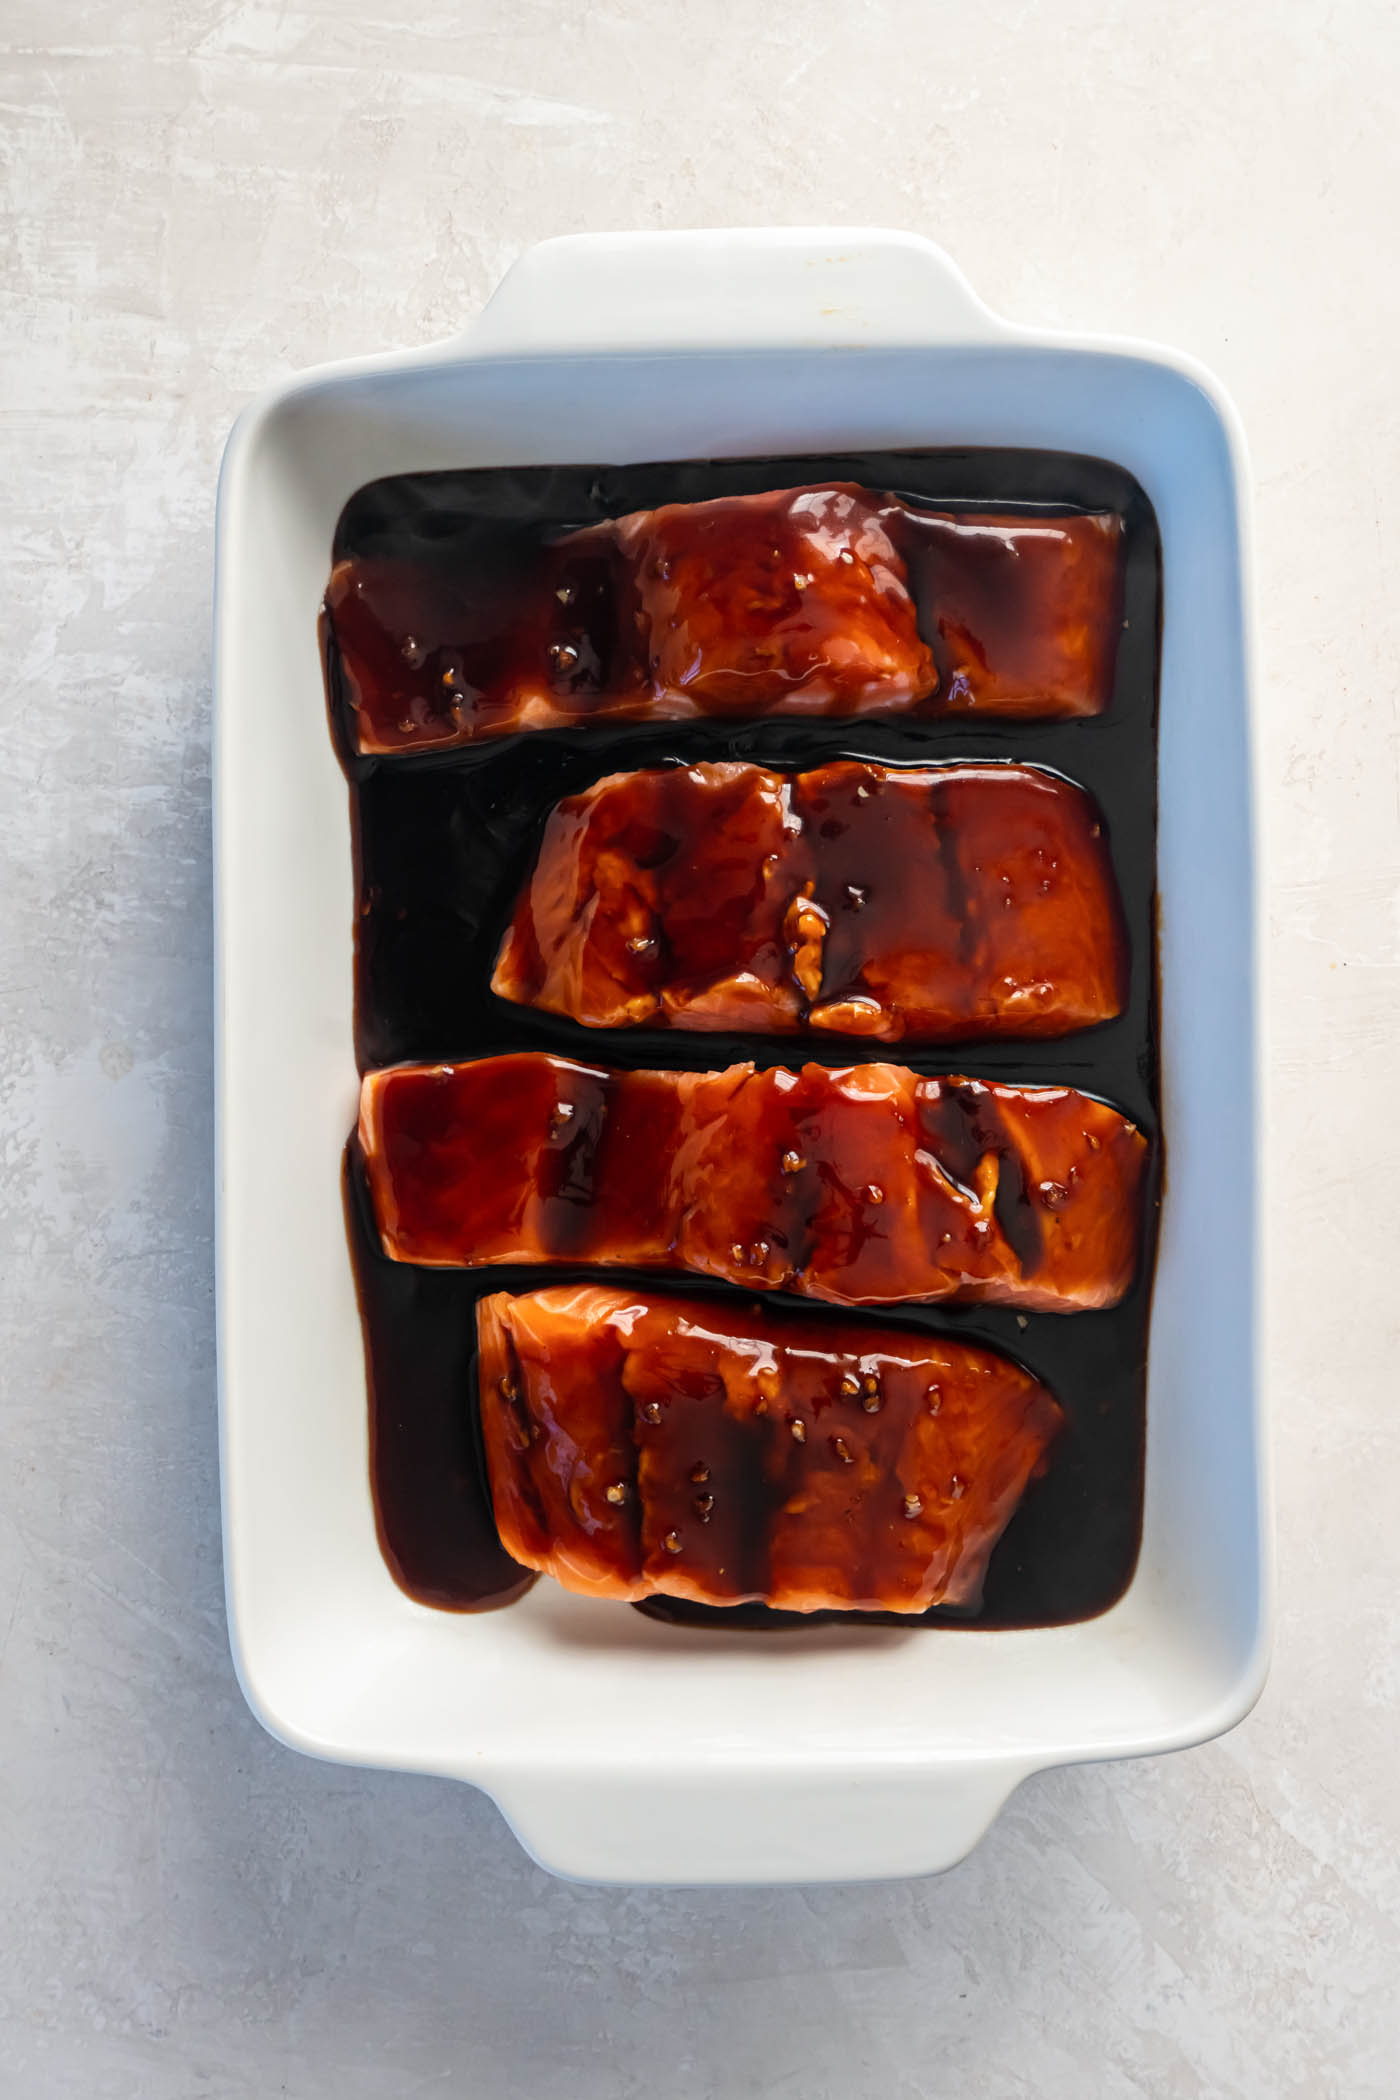 Teriyaki sauce poured over four salmon fillets in baking dish, before baking.